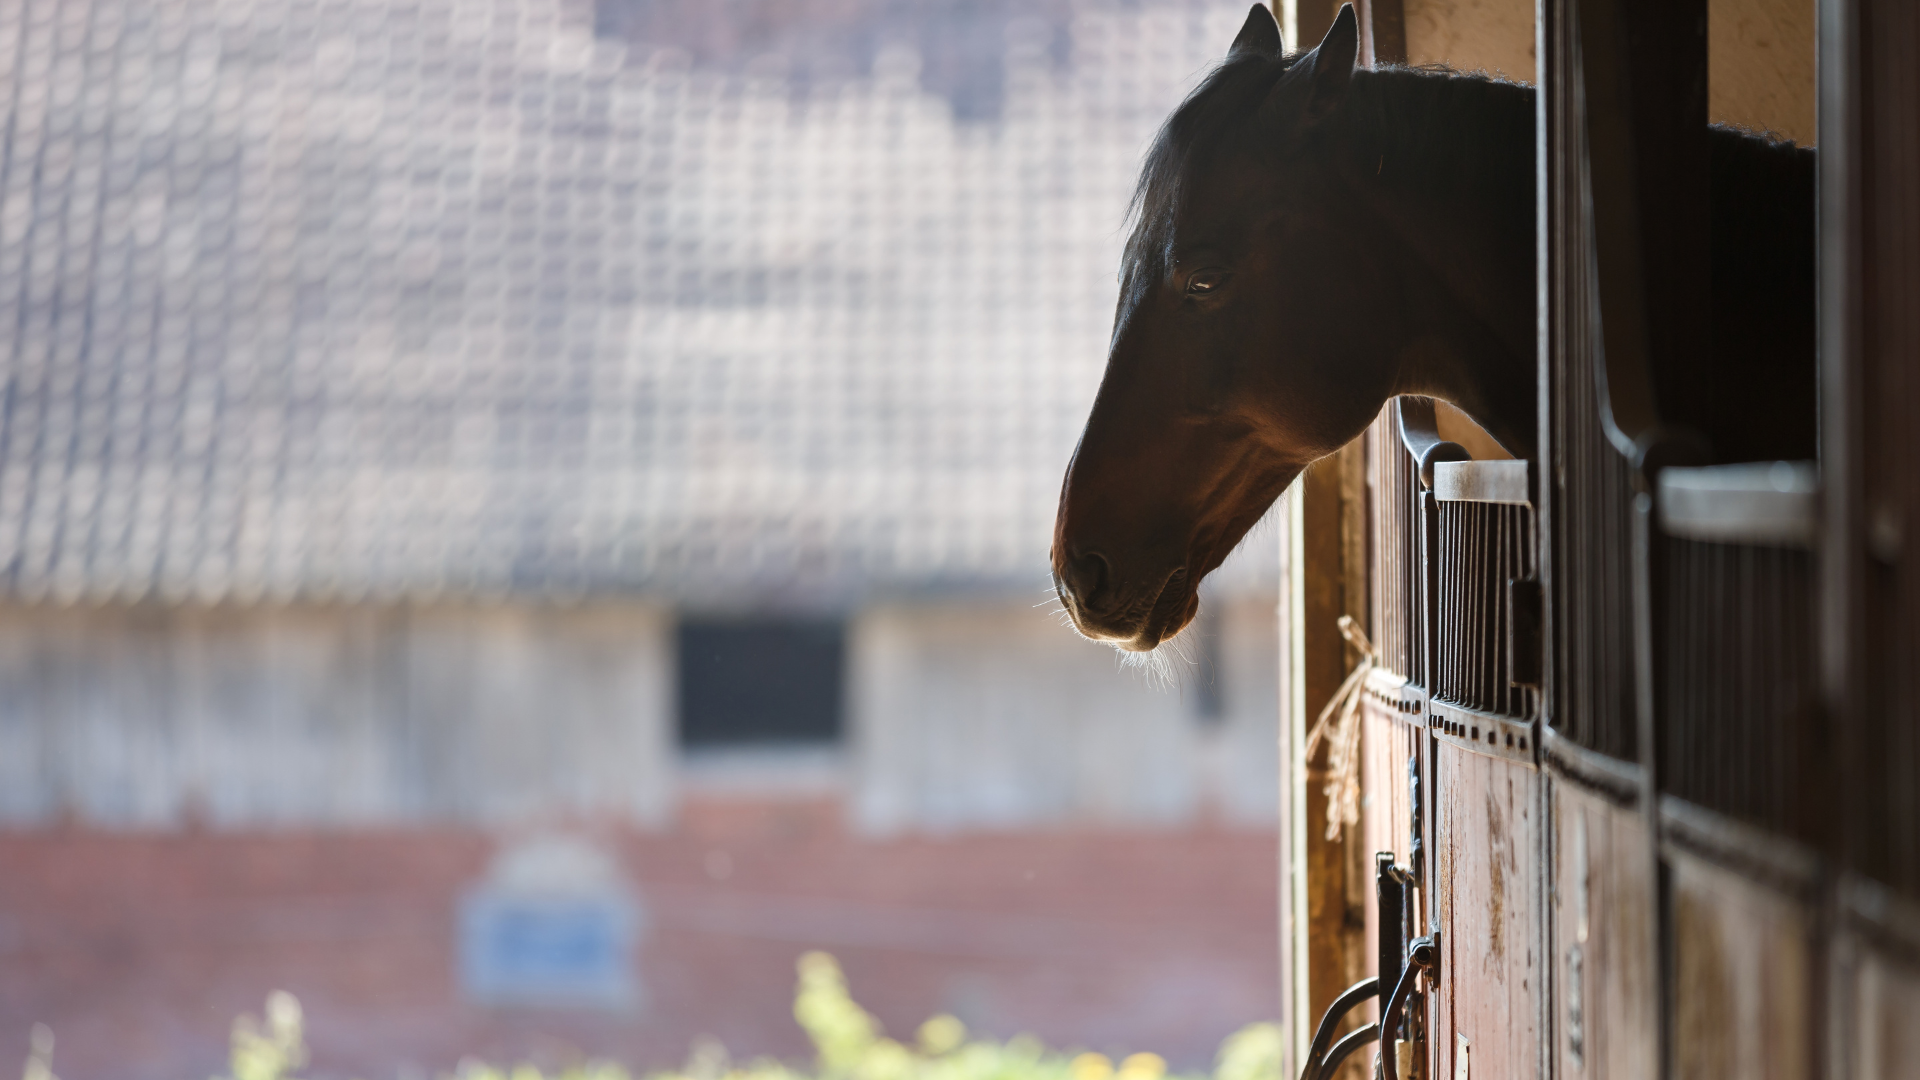 Weaving in Horses: What Causes It & How to Prevent It